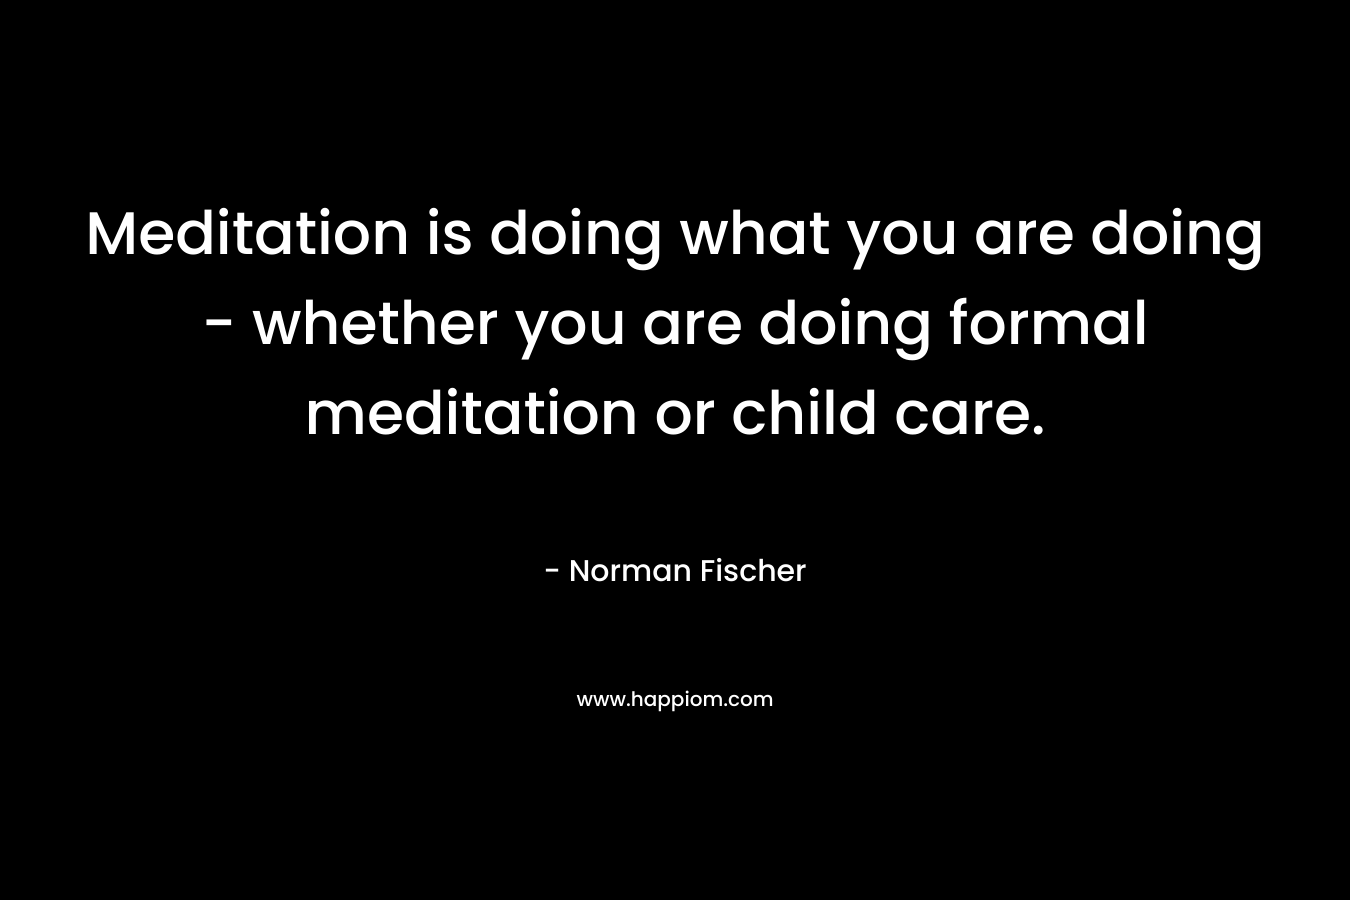 Meditation is doing what you are doing - whether you are doing formal meditation or child care.